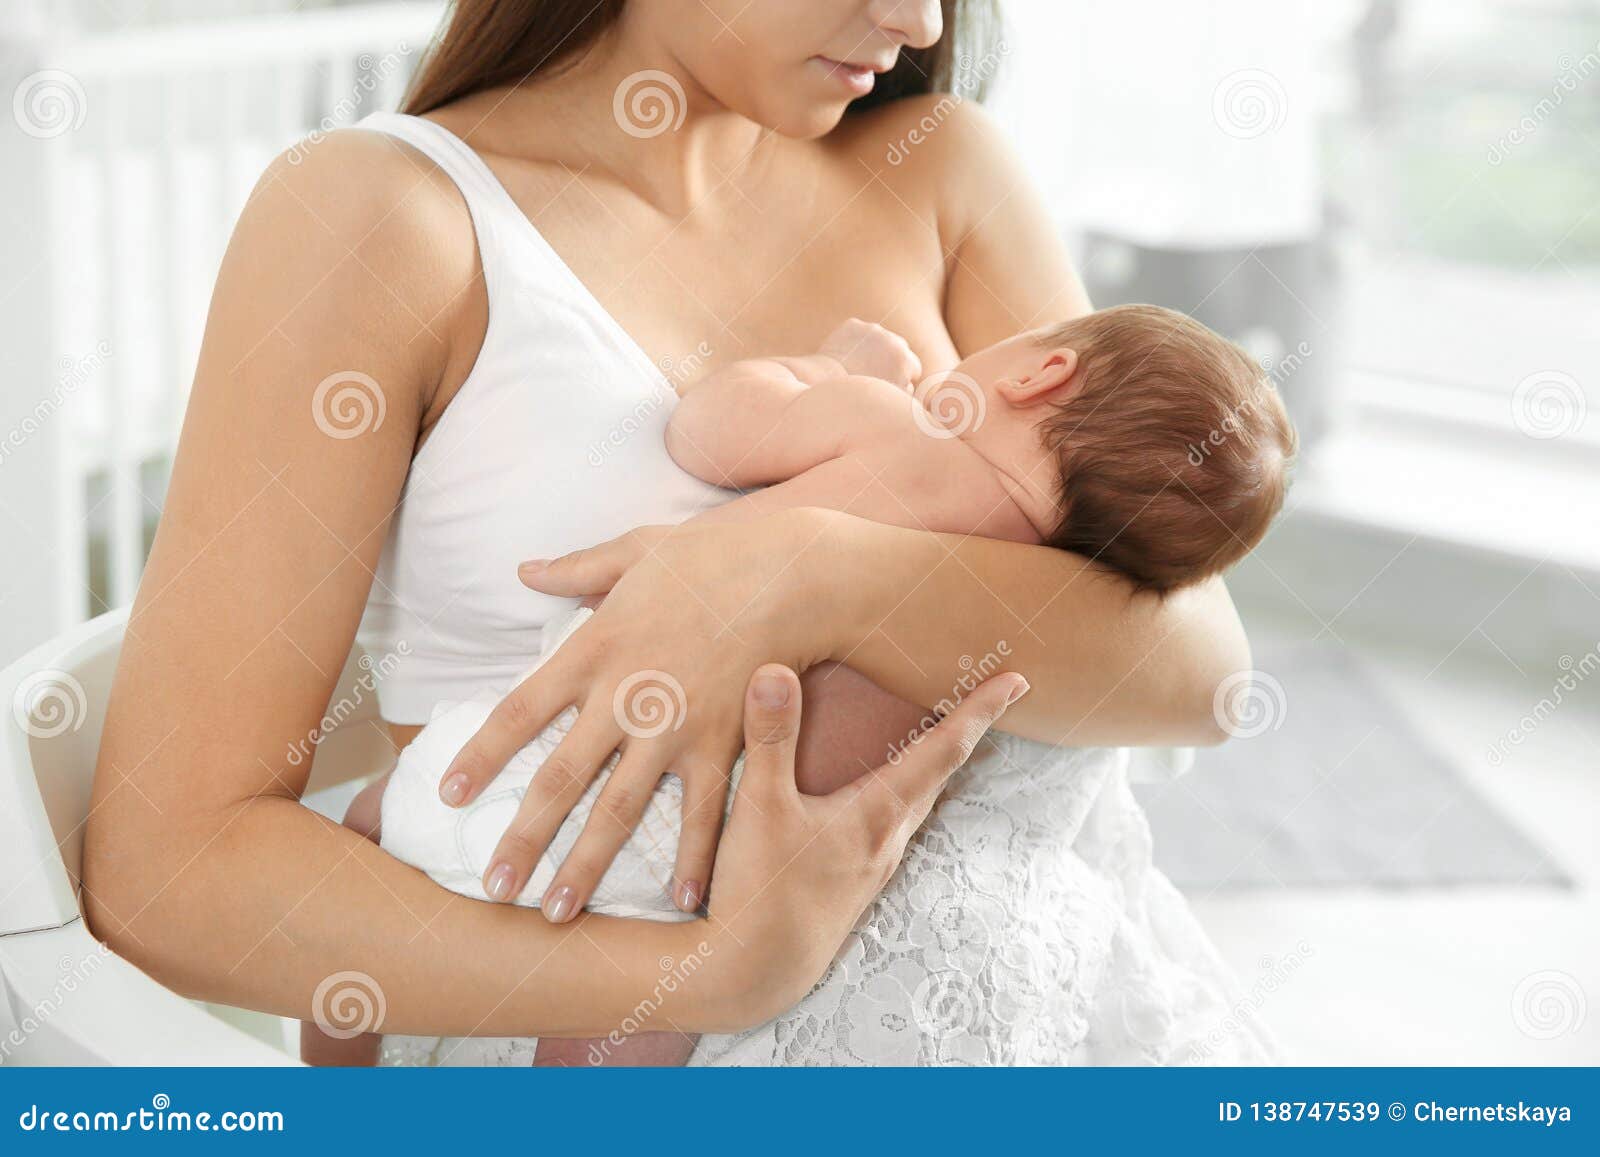 wife lacting her baby